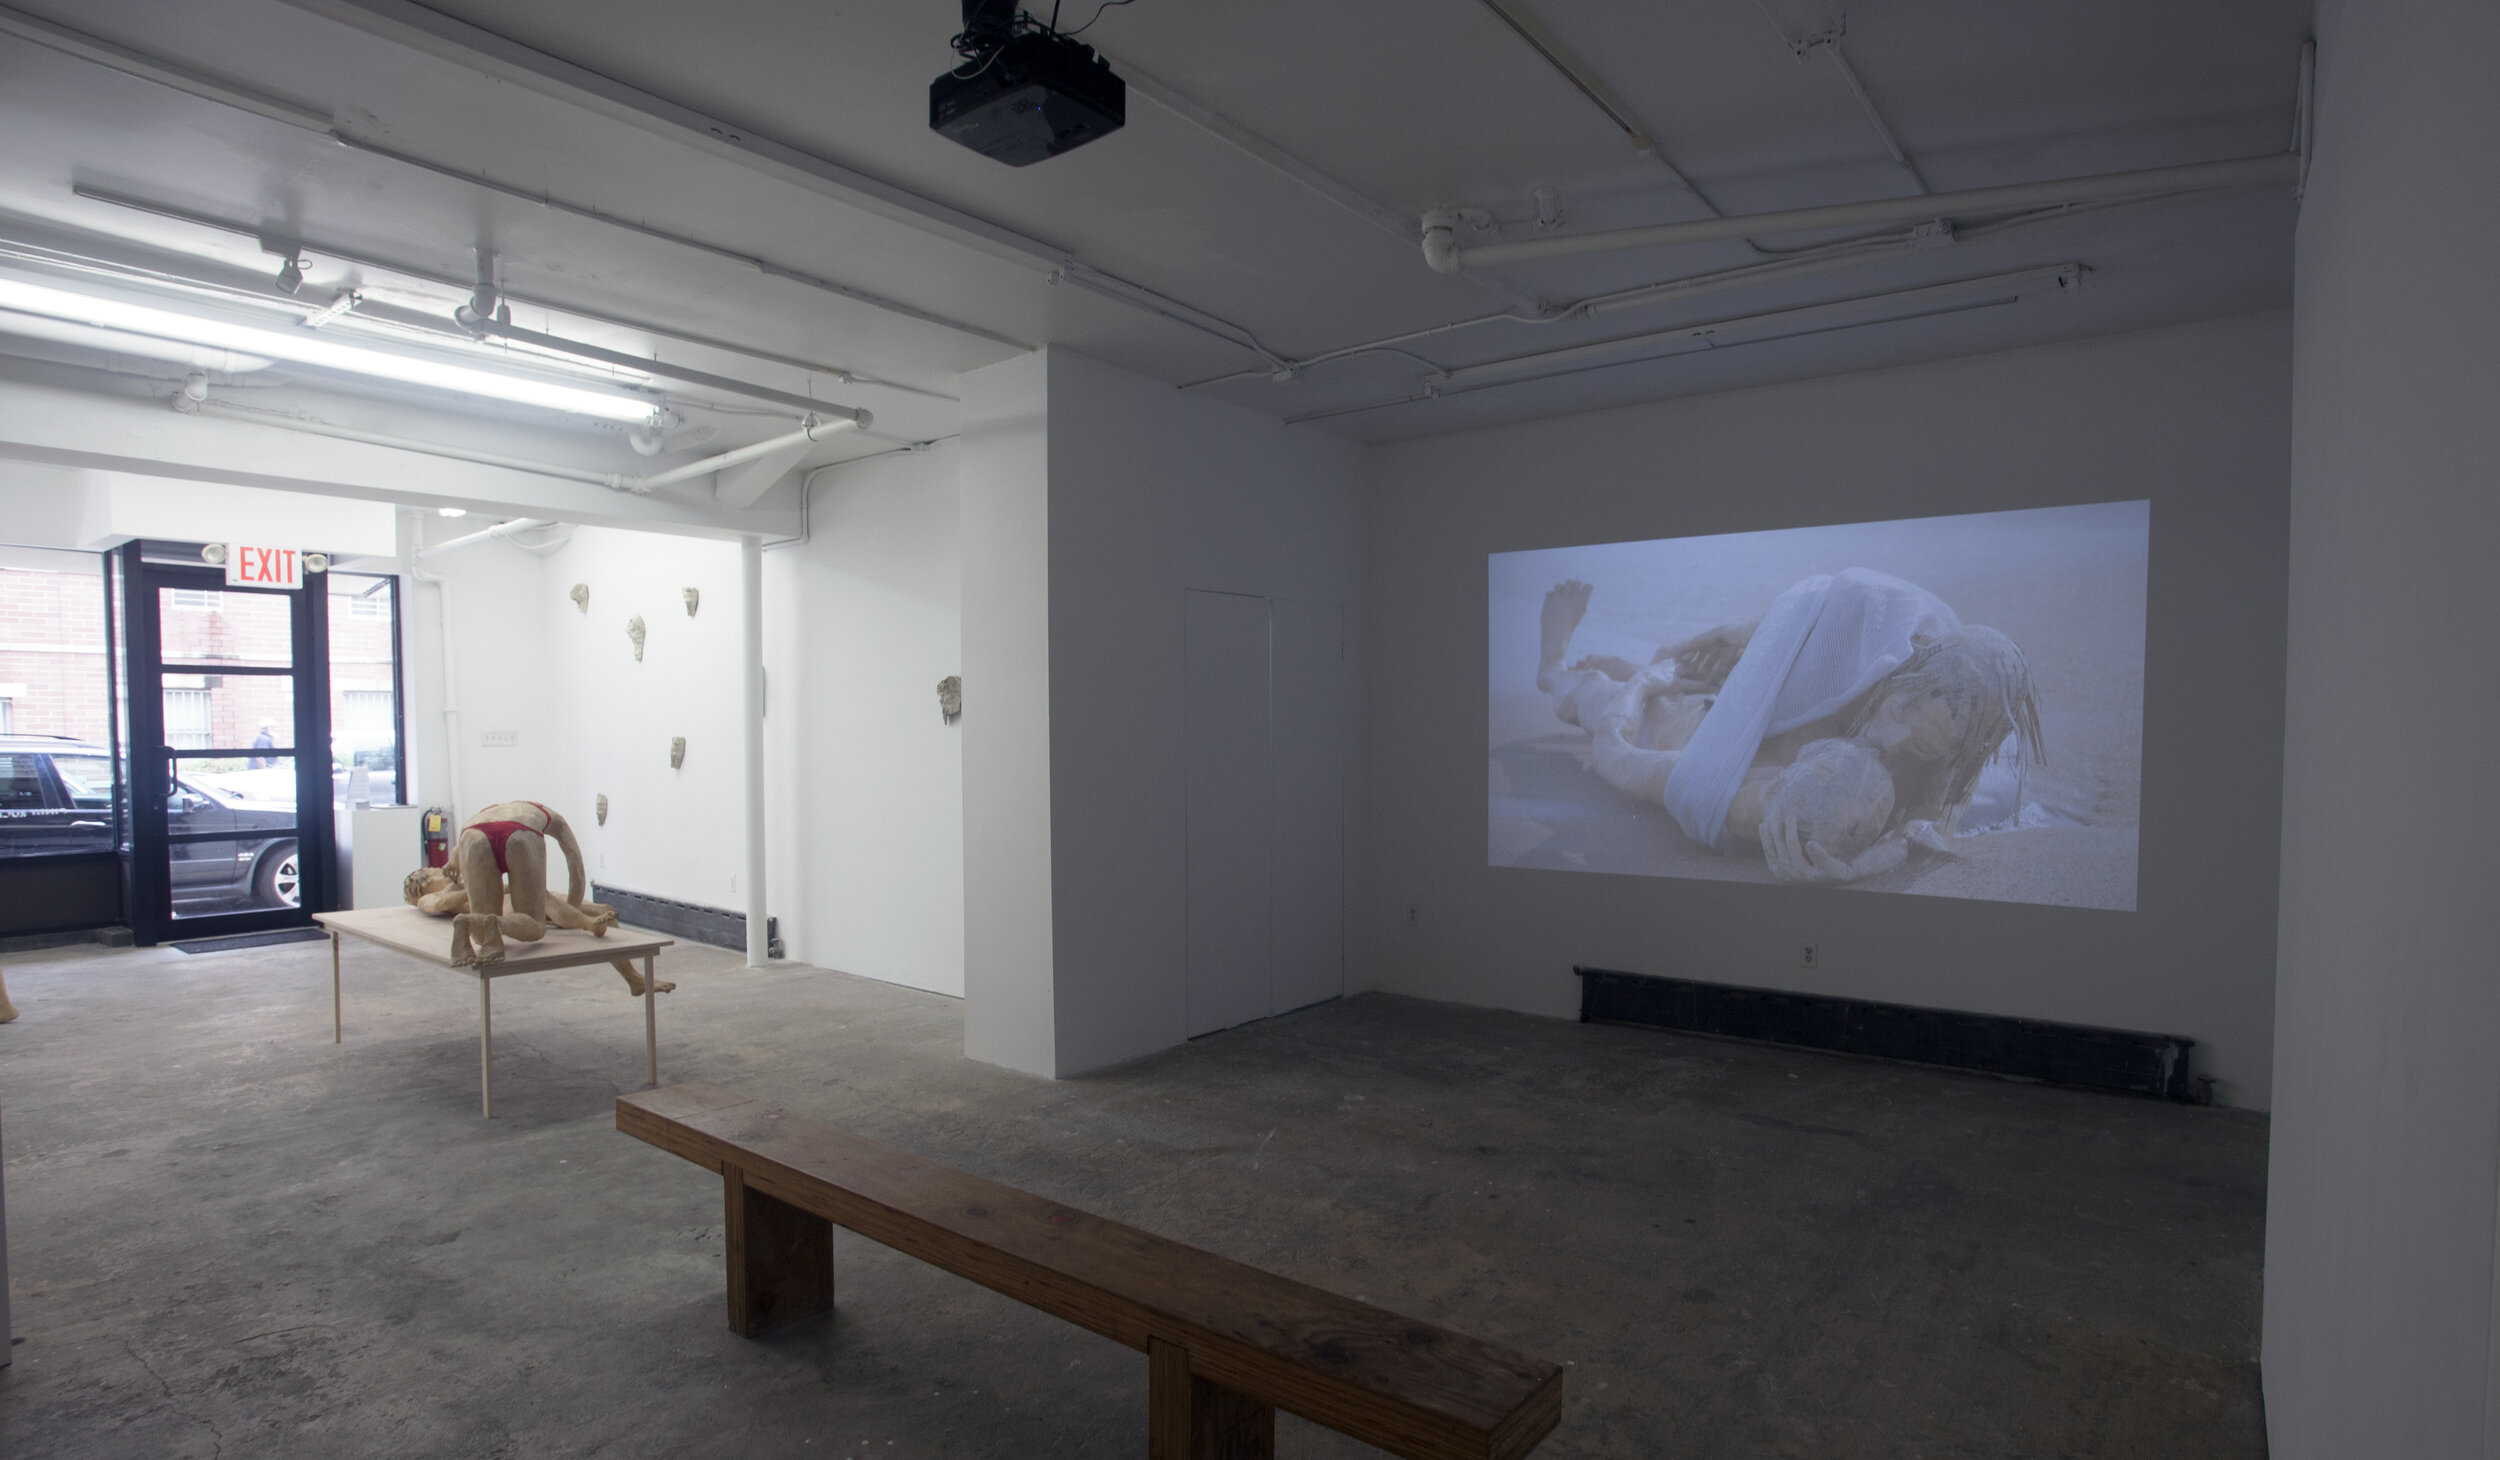 Installation images of sculpture and video works by Juan Pablo Langlois from his exhibition, Afterwards no one will remember, curated by Paula Solimano, at Cindy Rucker Gallery